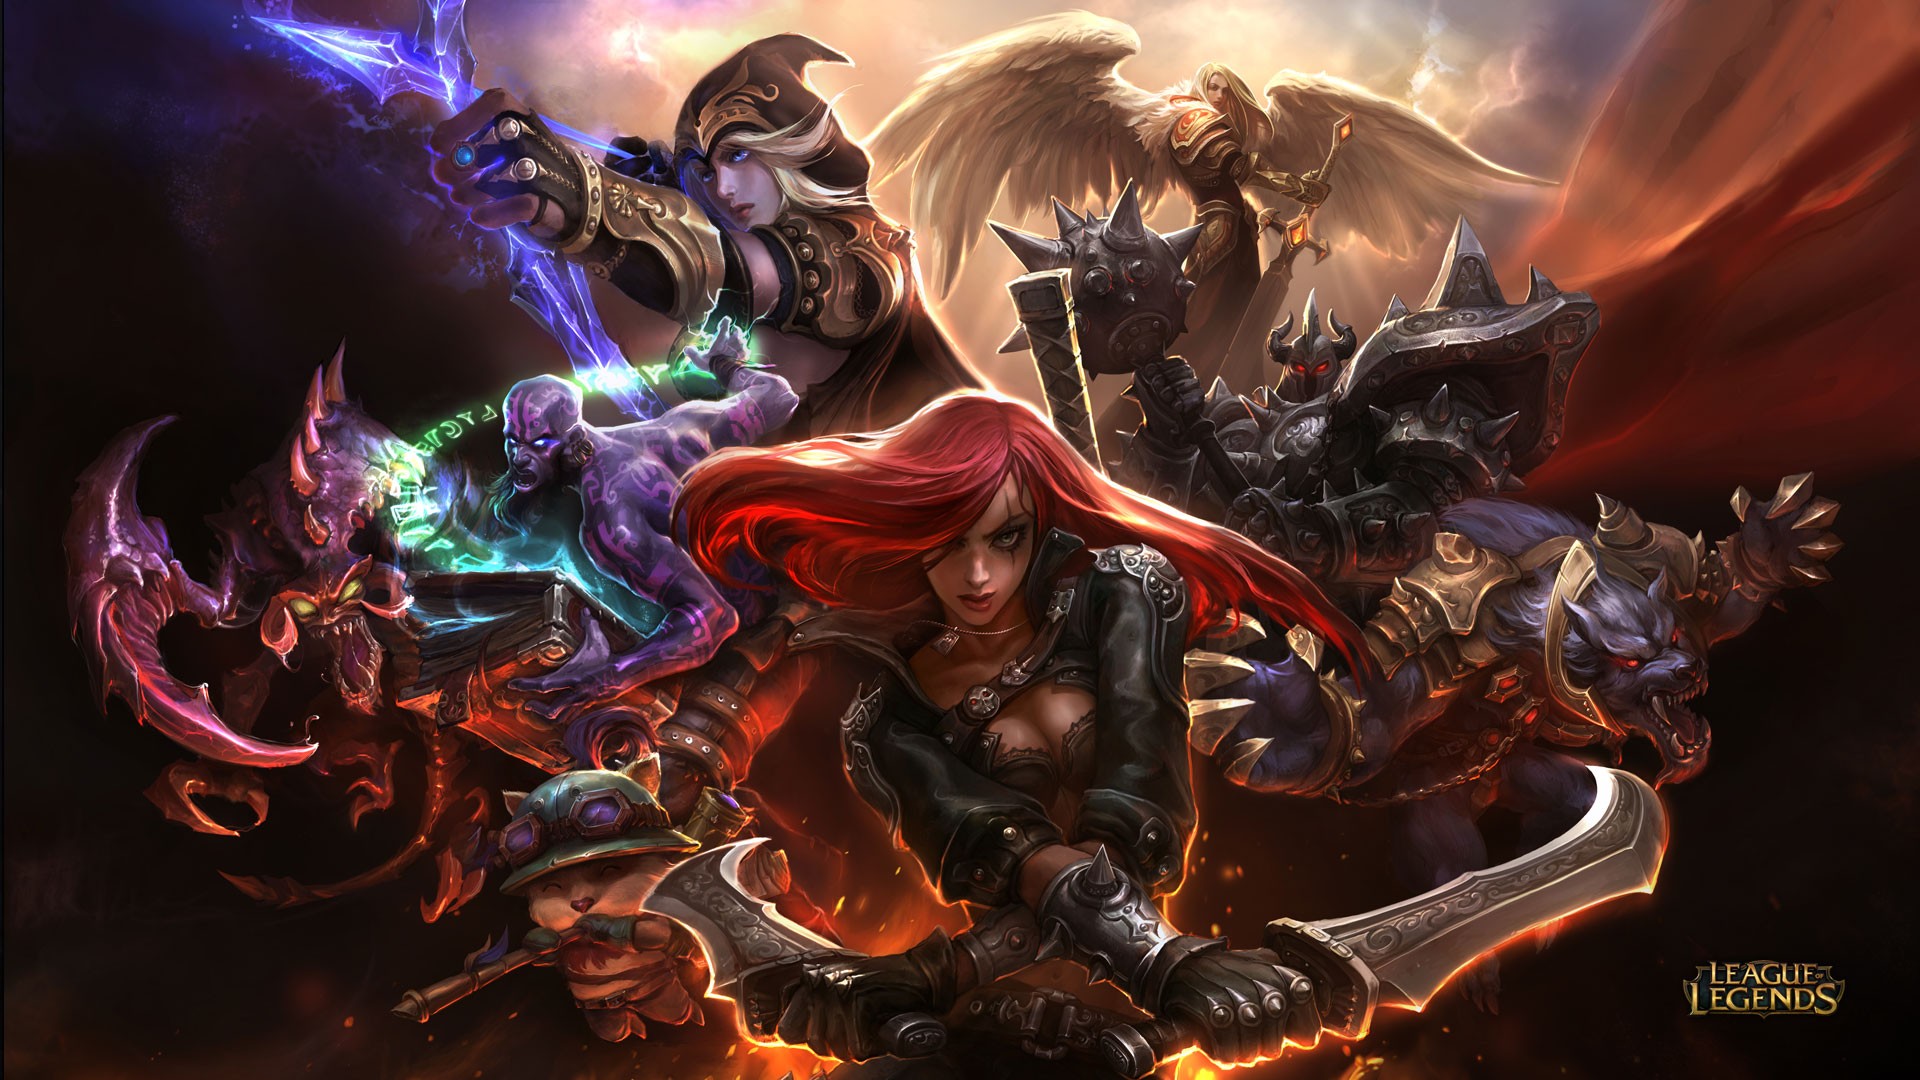 General 1920x1080 League of Legends video games PC gaming fantasy girl redhead long hair weapon cleavage video game girls women with swords boobs looking at viewer Ashe (League of Legends) Katarina (League of Legends) Cho'Gath (League of Legends) Ryze (League of Legends) Teemo (League of Legends) Warwick (League of Legends) Mordekaiser (League of Legends) Kayle (League of Legends)